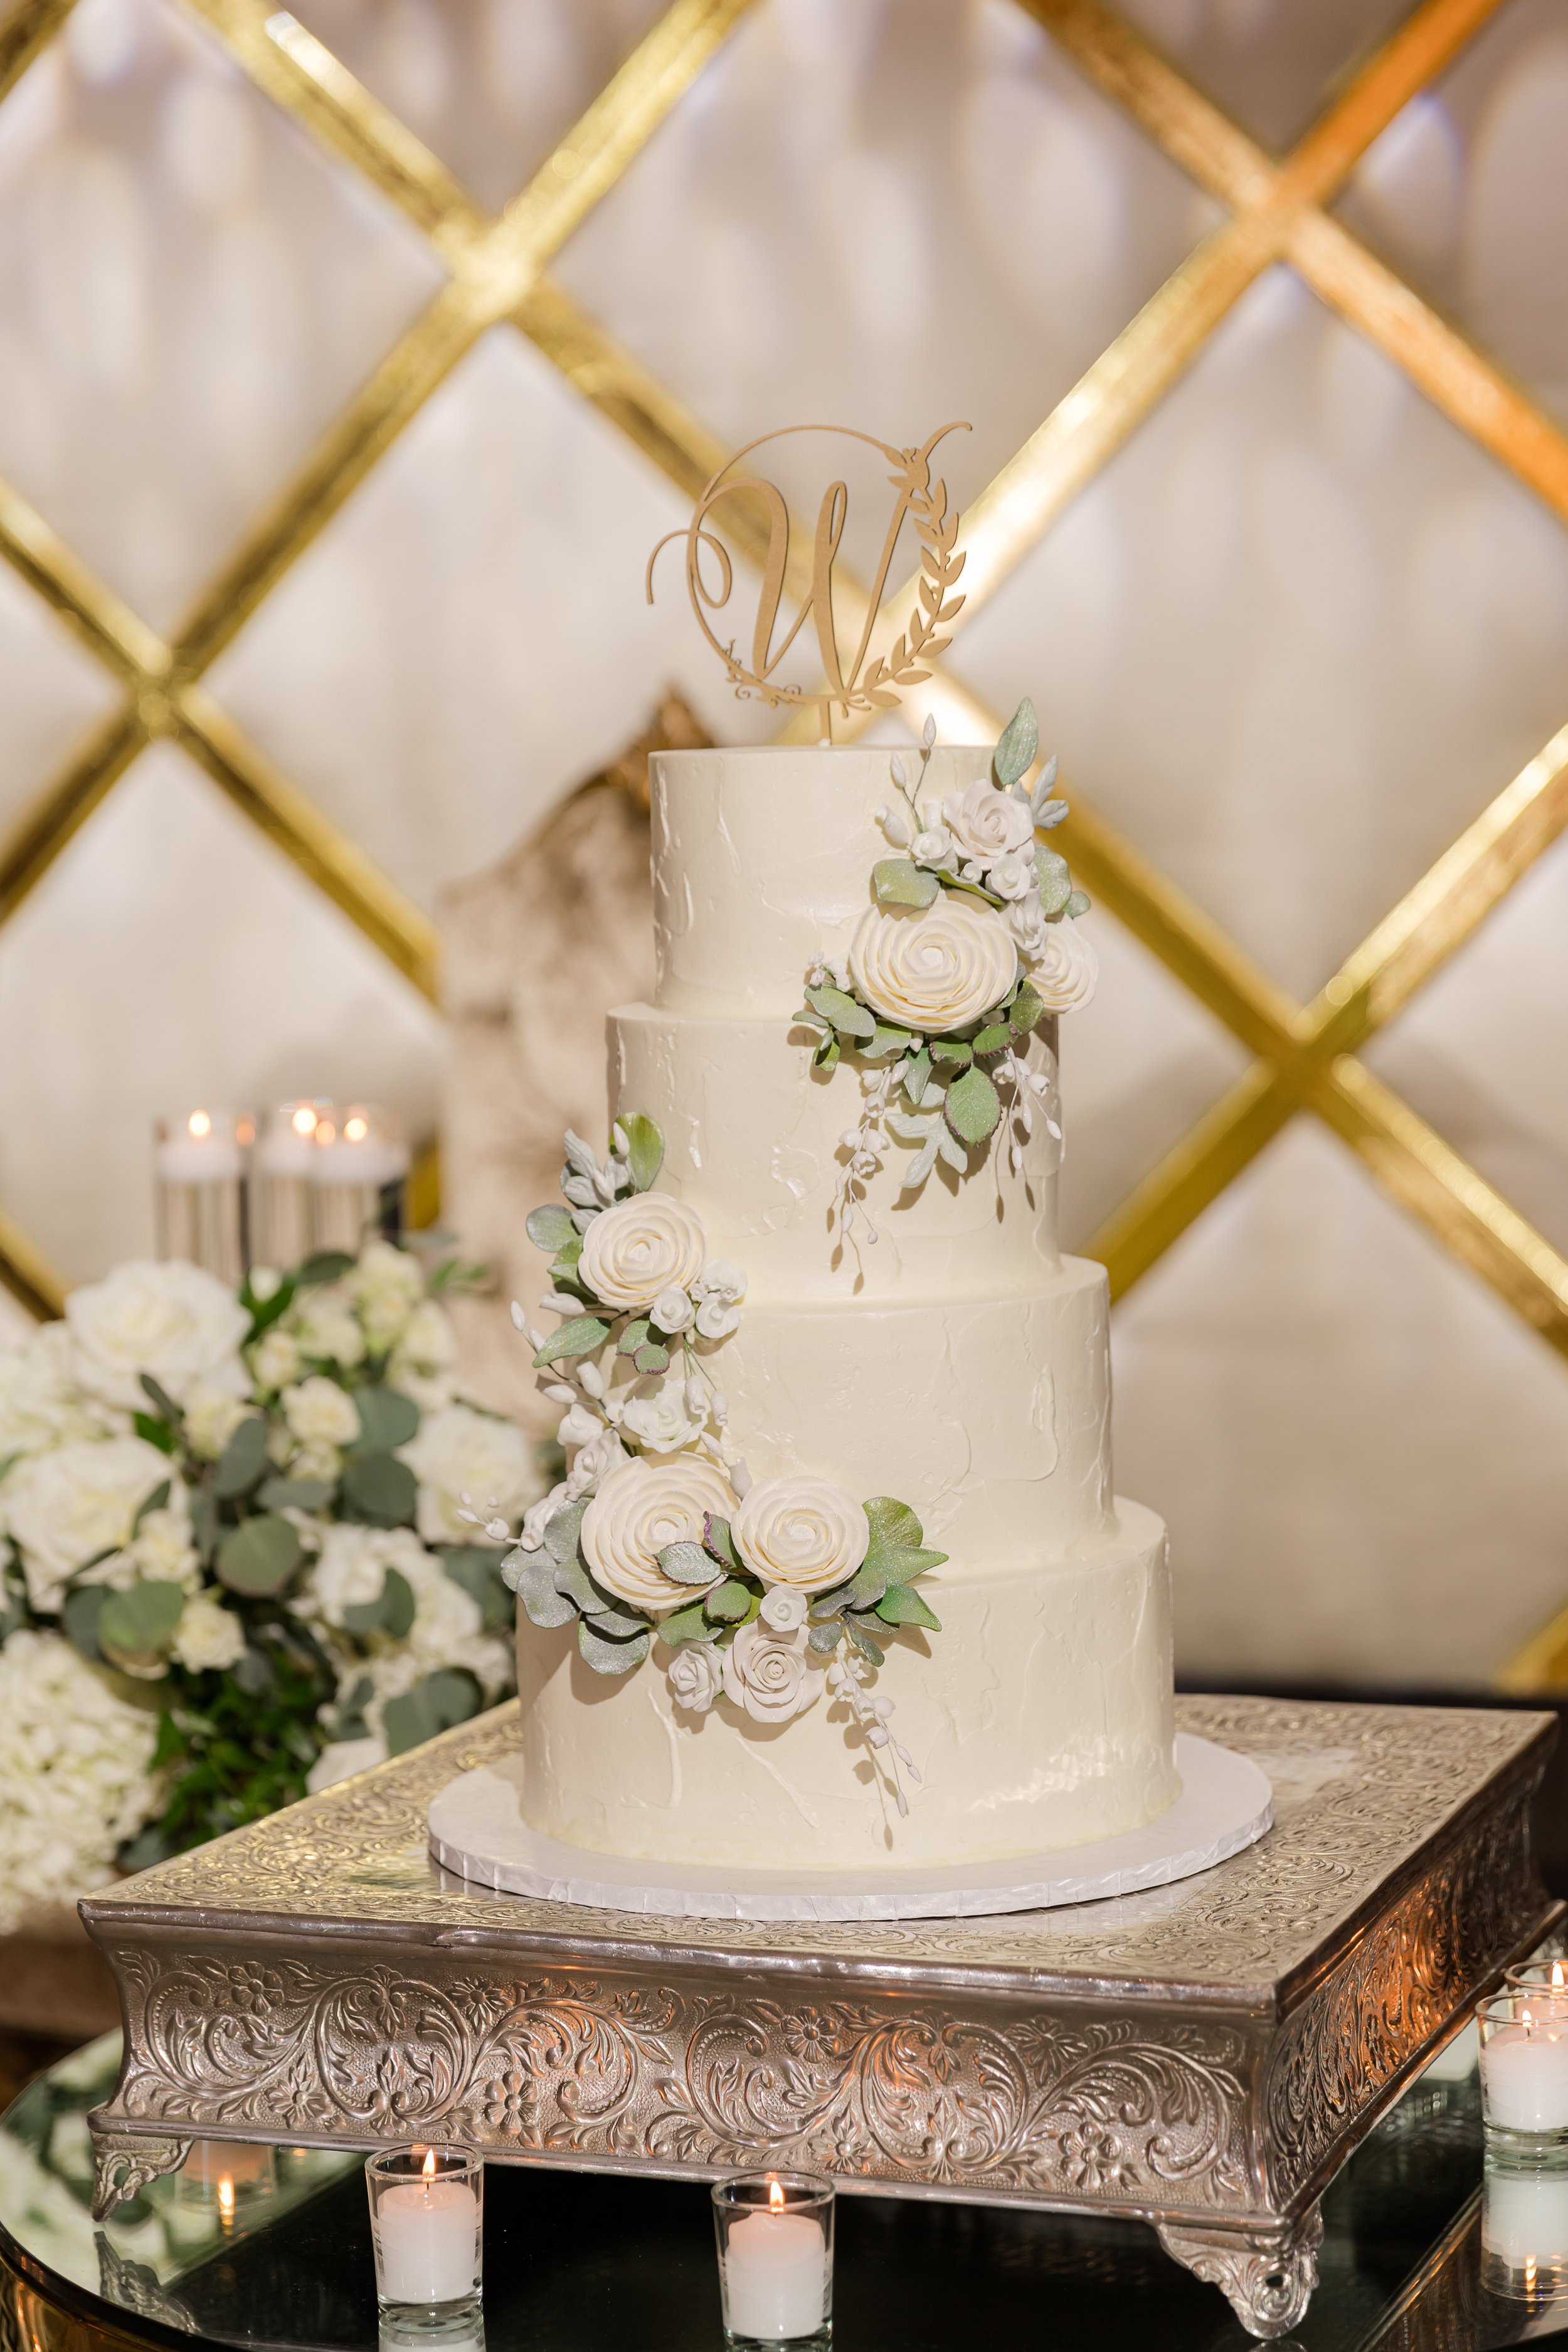 Wedding Cake Inspiration To Match Your Theme | Patisserie Valerie